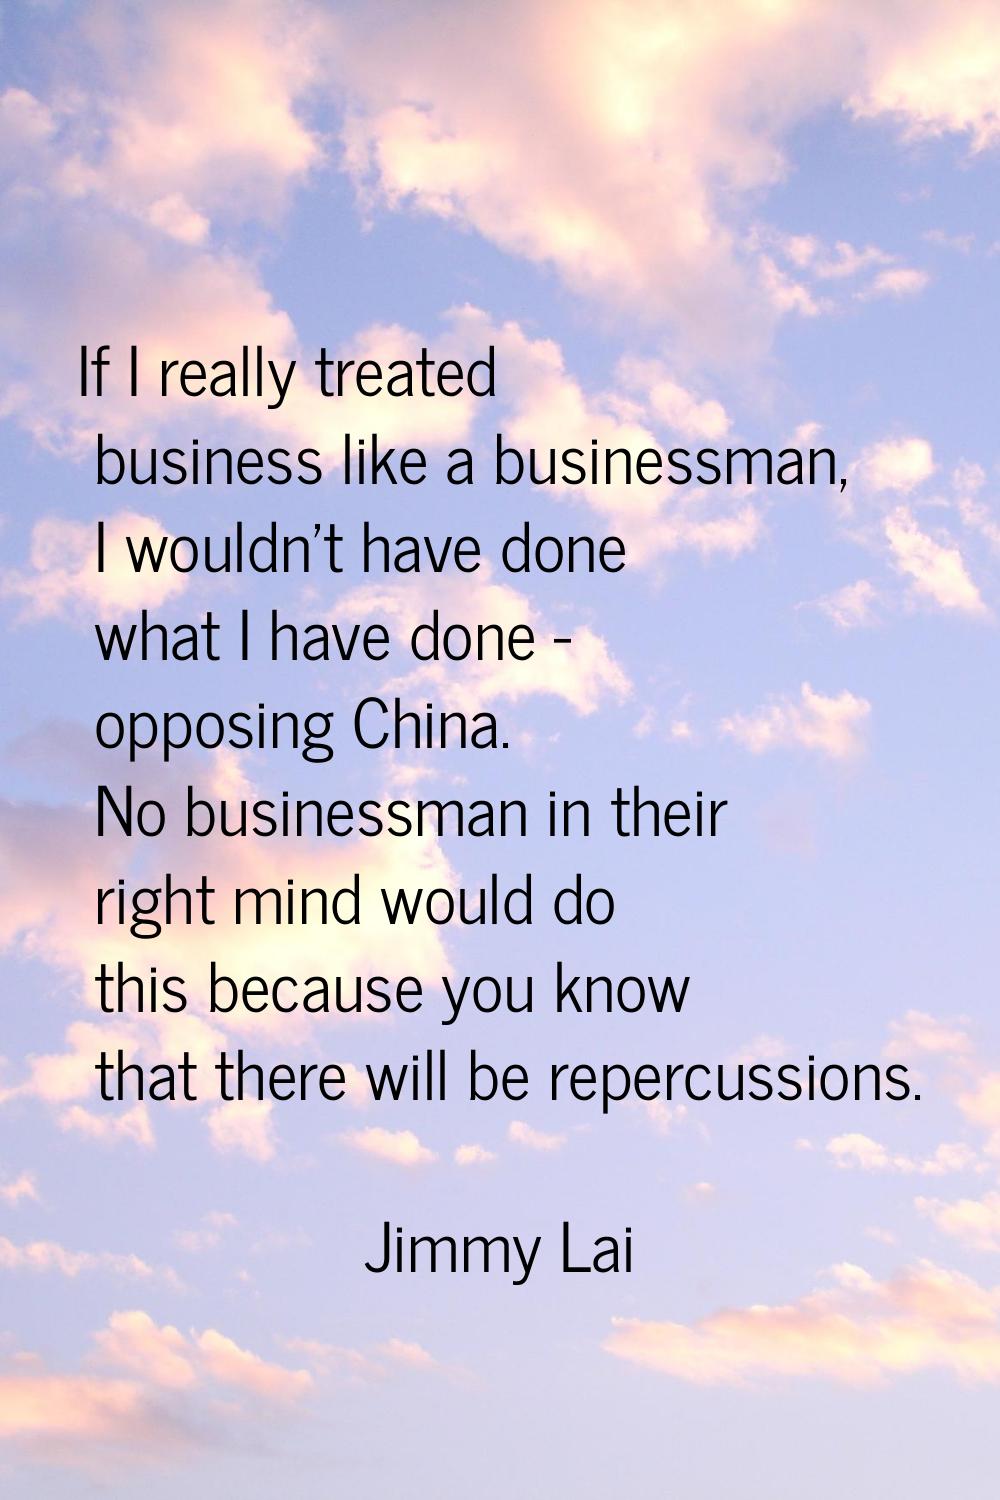 If I really treated business like a businessman, I wouldn't have done what I have done - opposing C